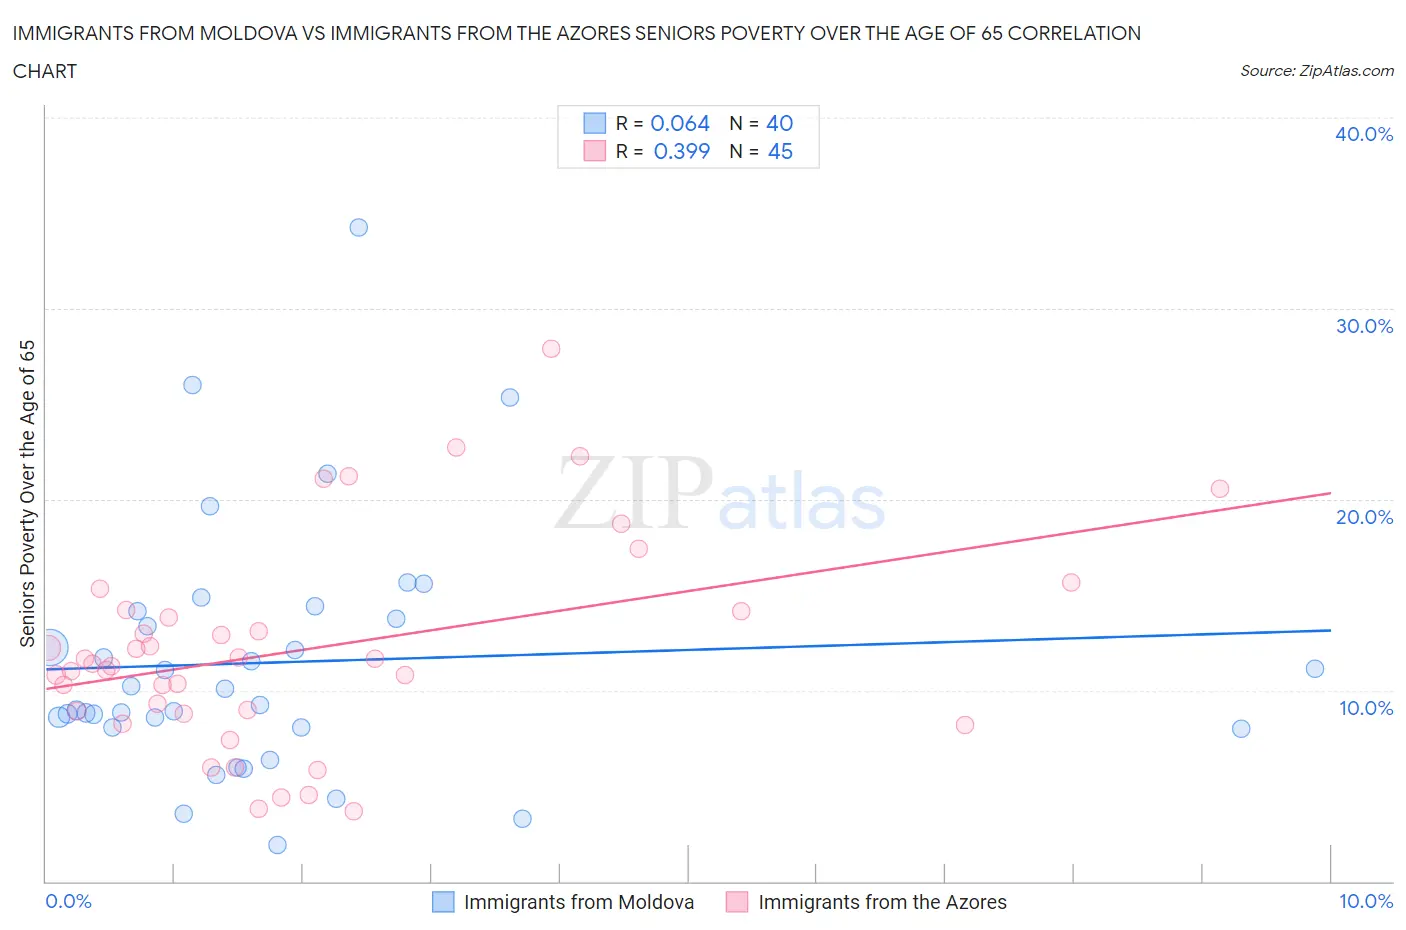 Immigrants from Moldova vs Immigrants from the Azores Seniors Poverty Over the Age of 65